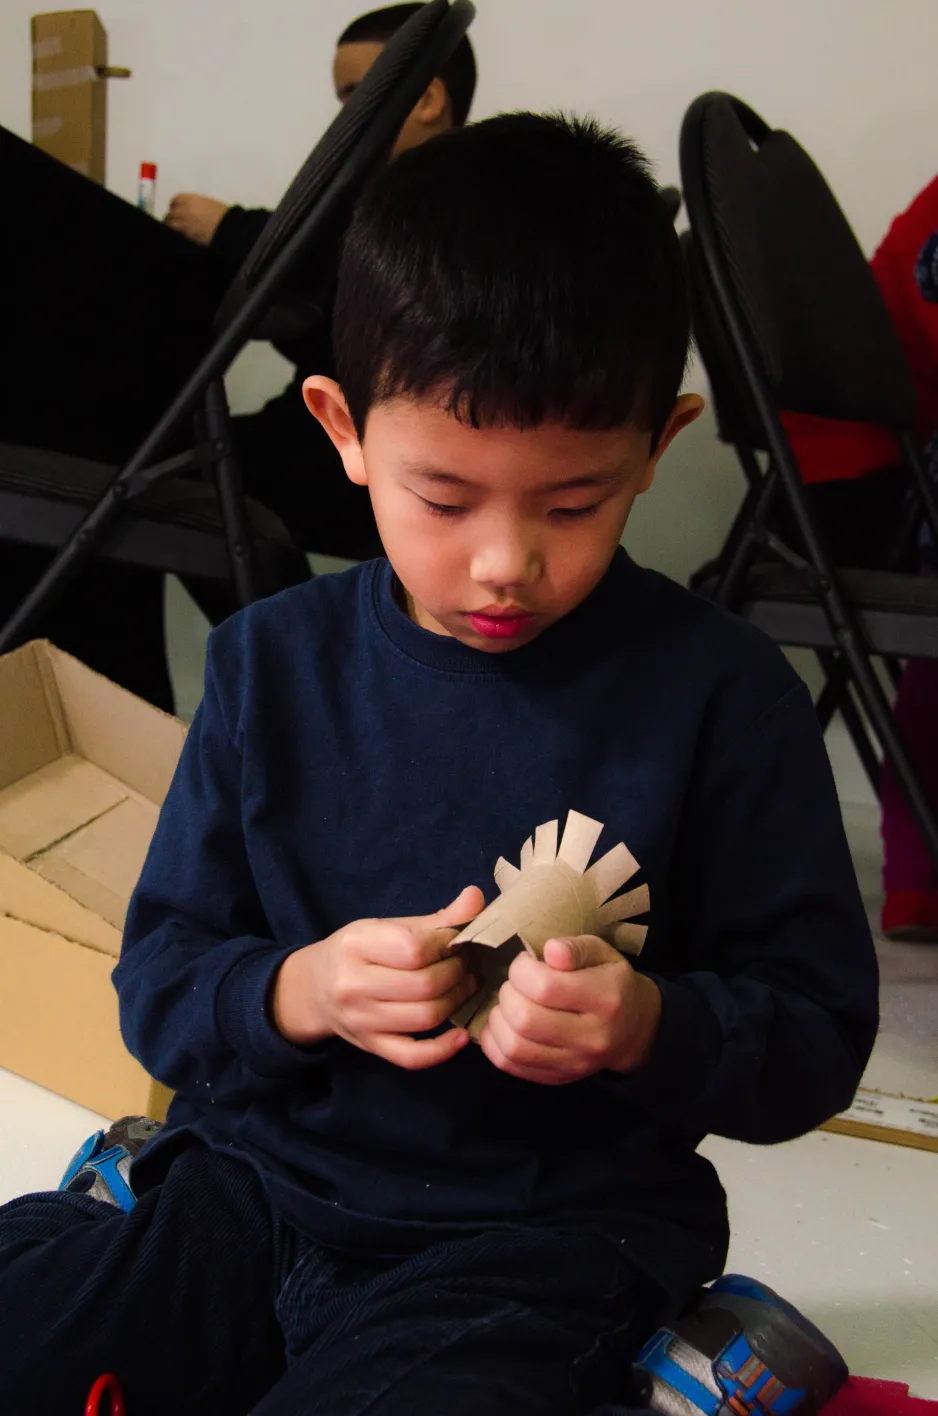 A boy cuts flanges into a toilet paper roll and surveys his work